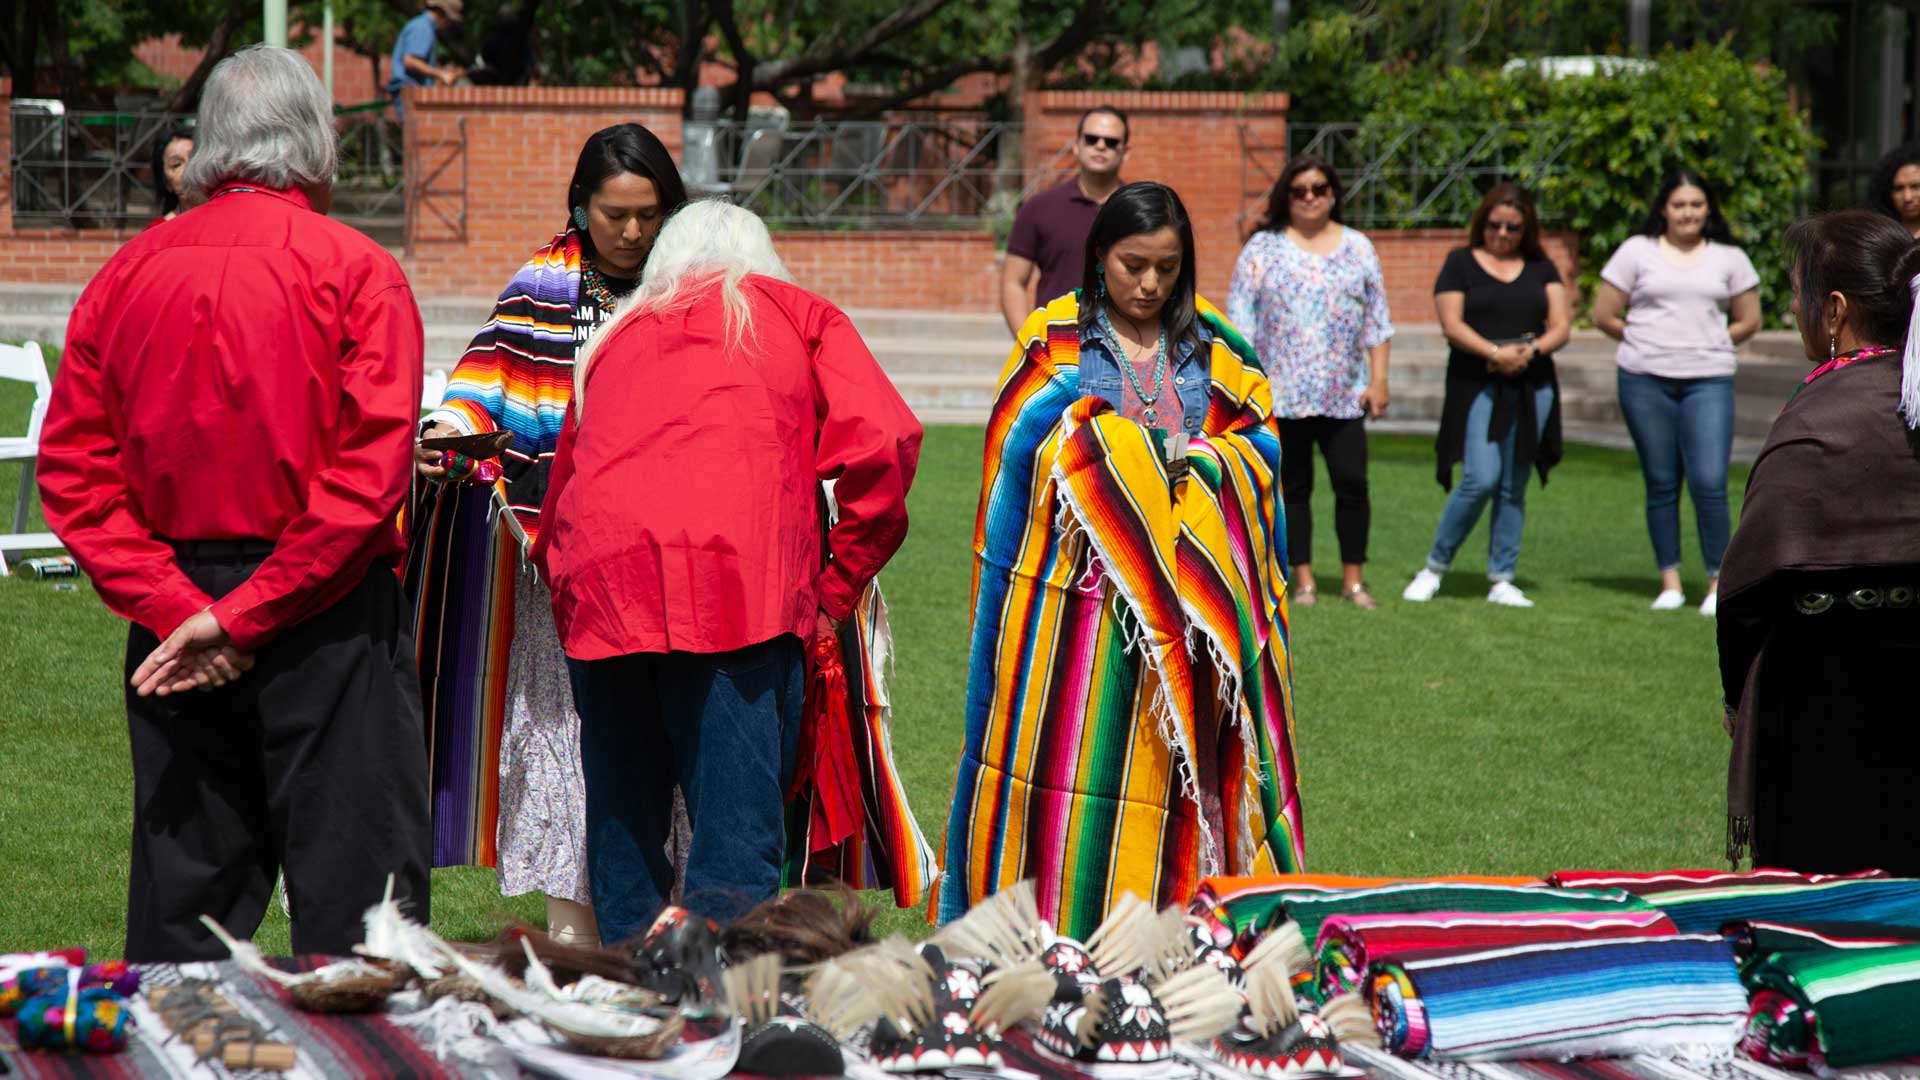 In recent years the College of Medicine had zero or one Indigenous graduate per class, but in the spring of 2019, eight members of American Indian tribes became the latest doctors from the UA.